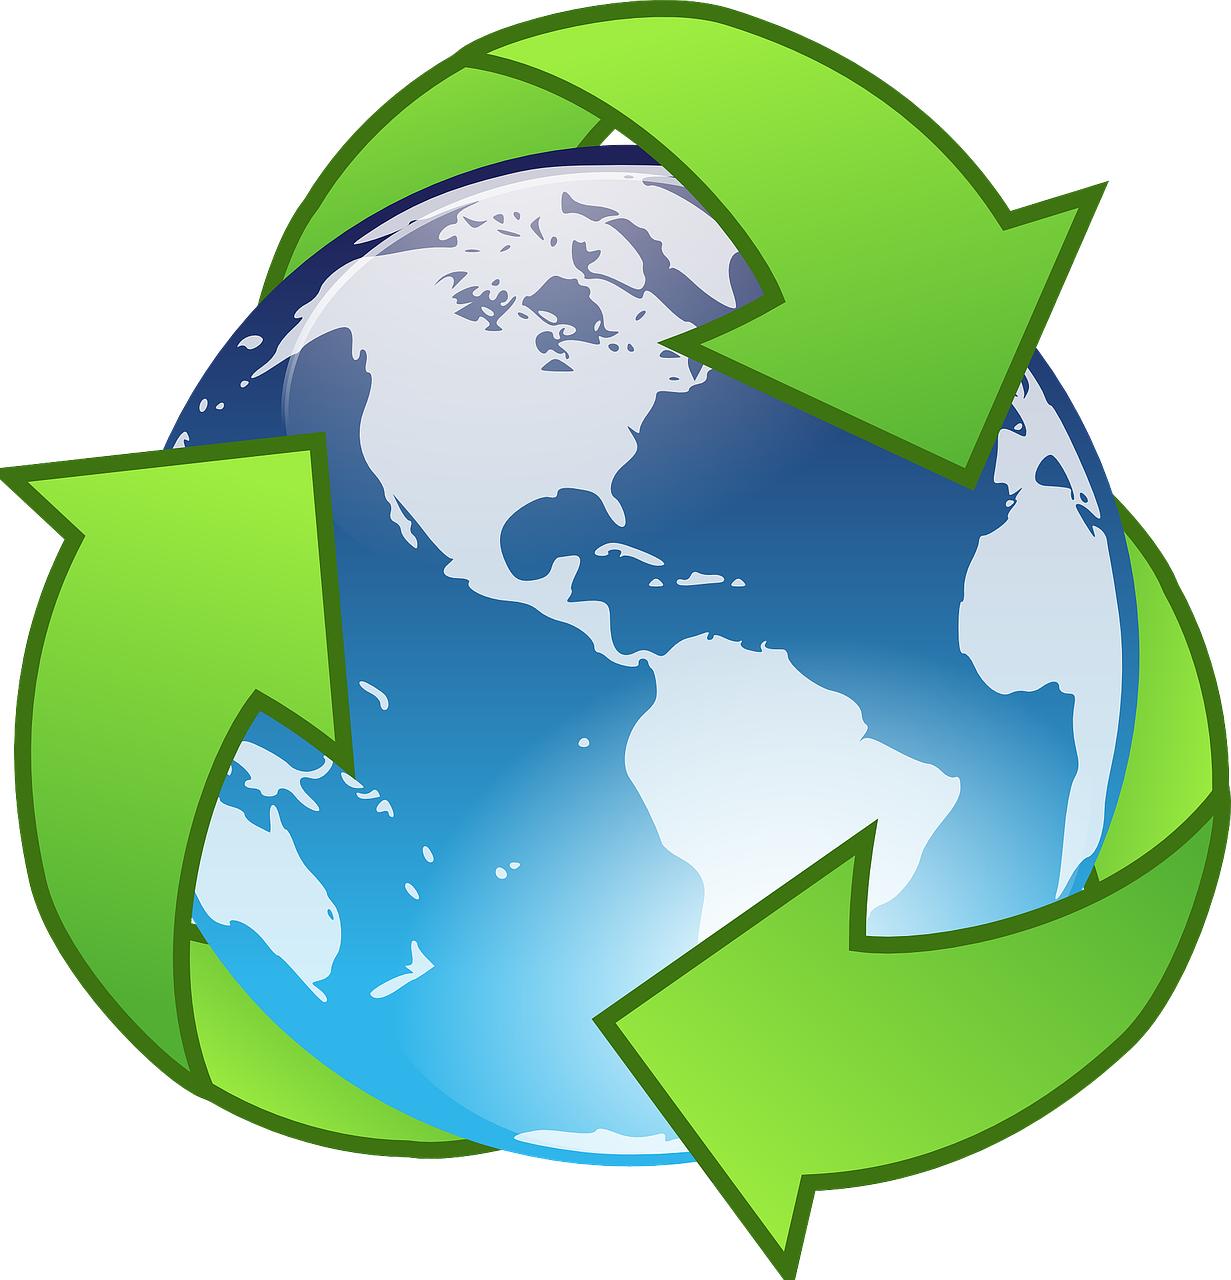 You can recycle your computer at several major retailers or give your computer new life by donating it or selling it.